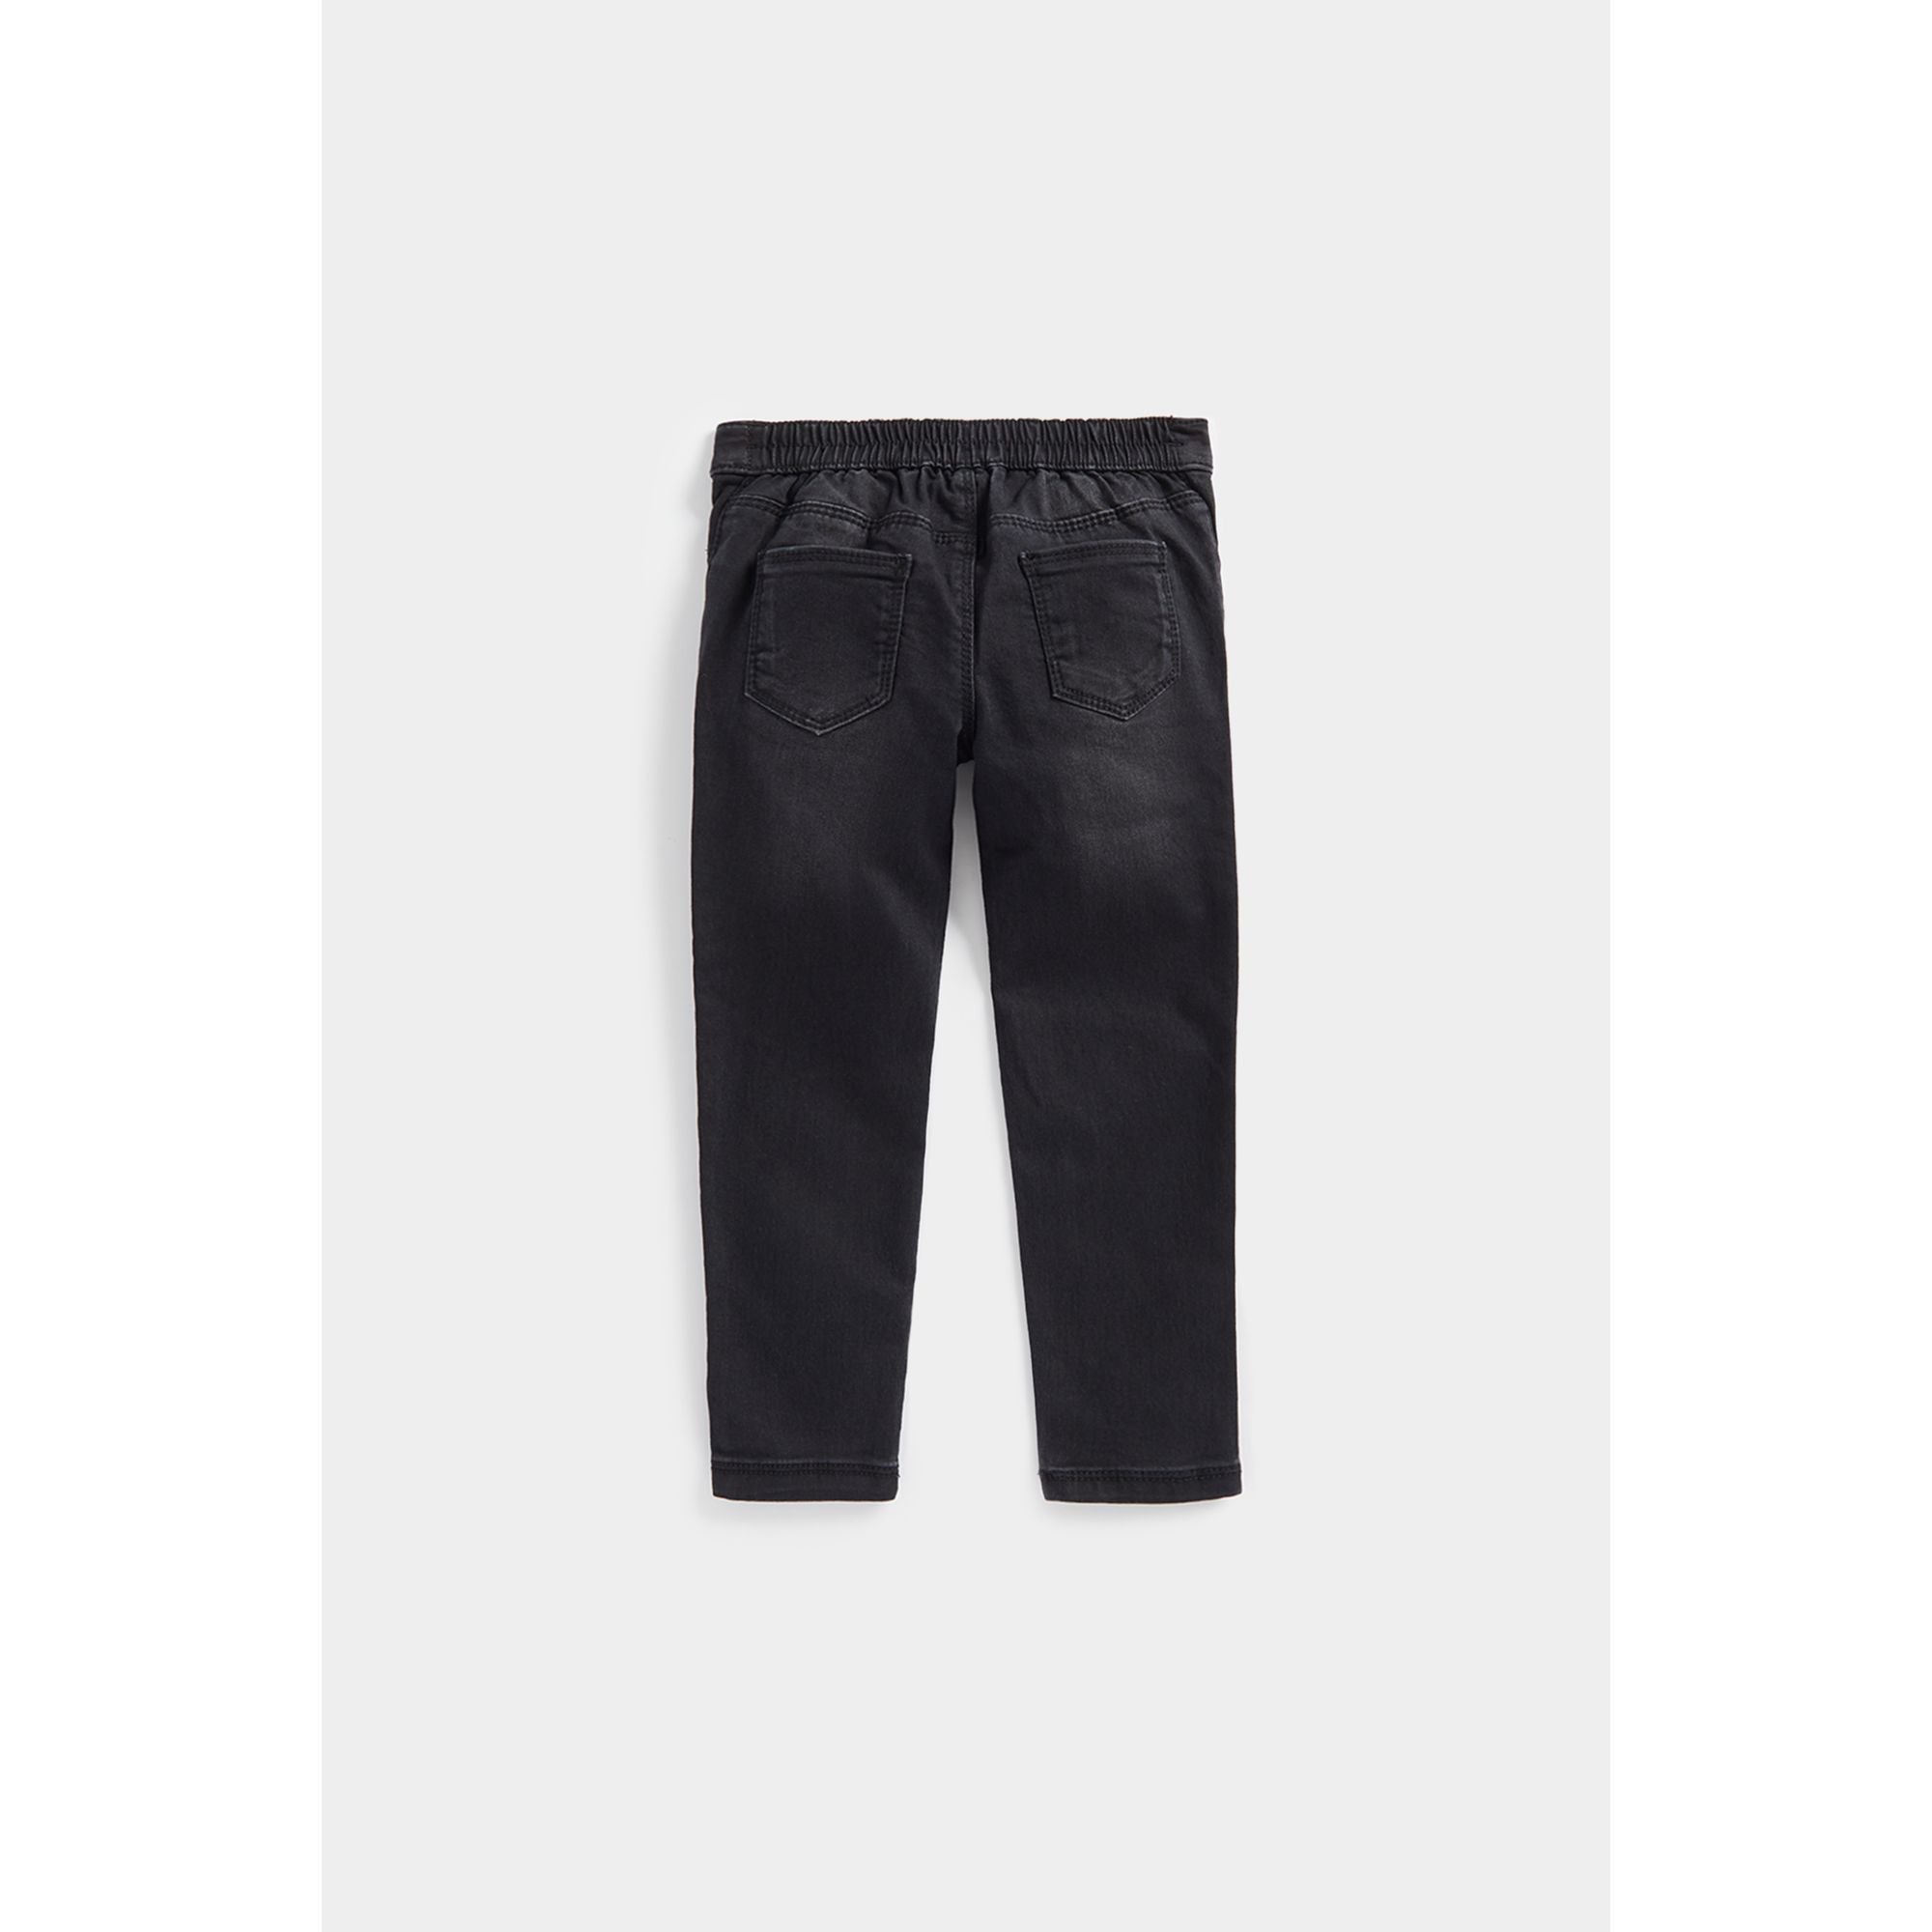 Mothercare Black Jeggings